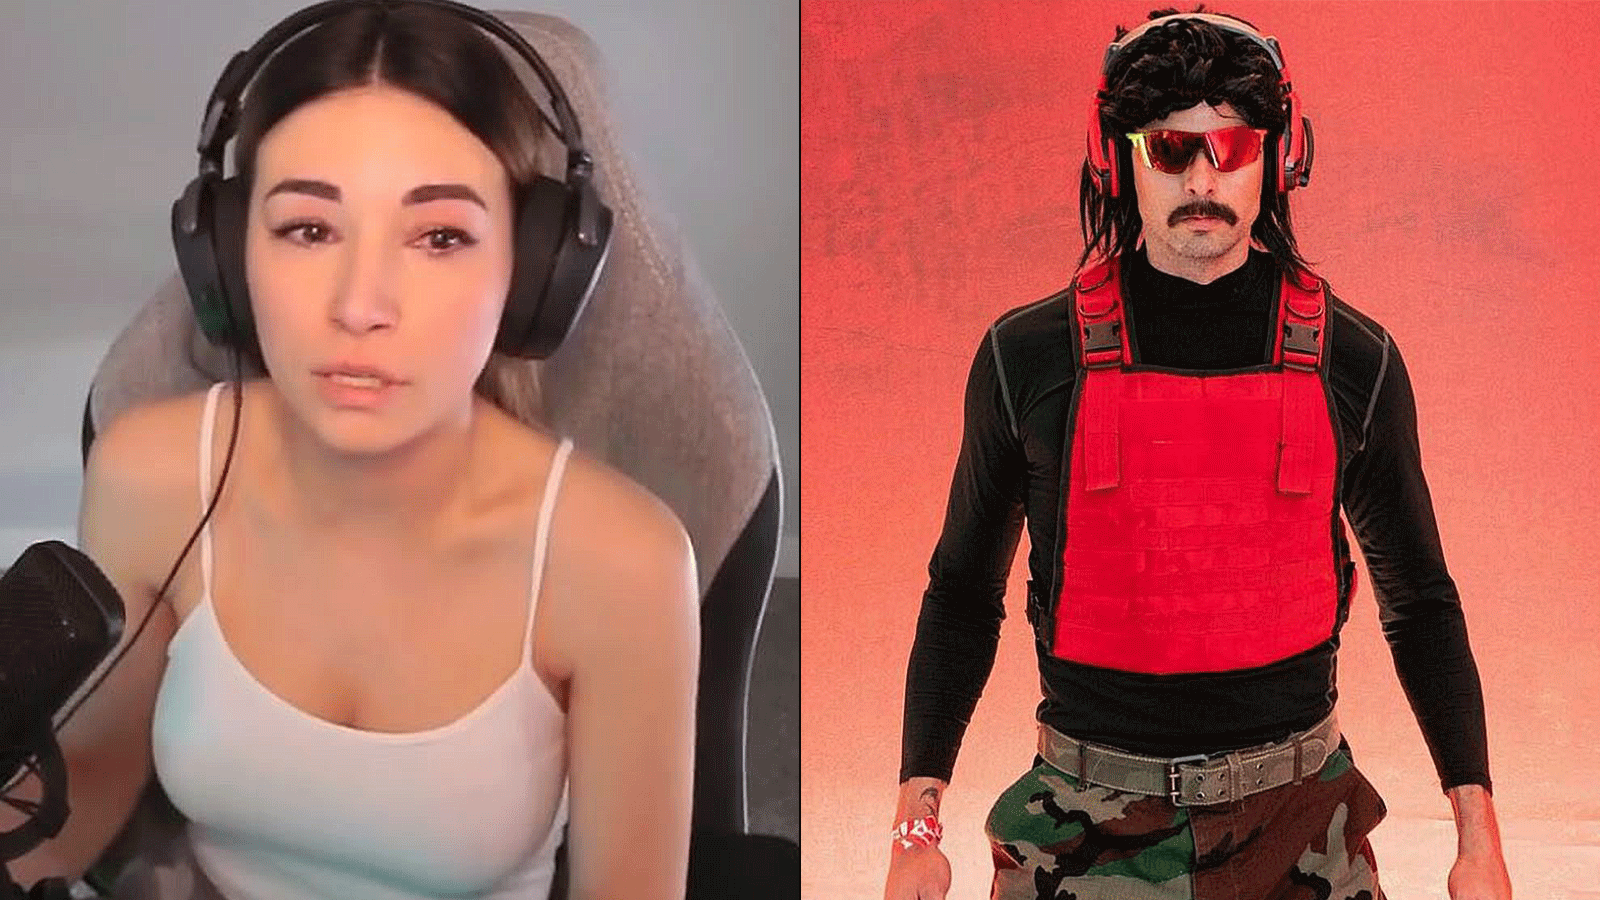 Alinity addresses rumors about Dr Disrespect Twitch ban